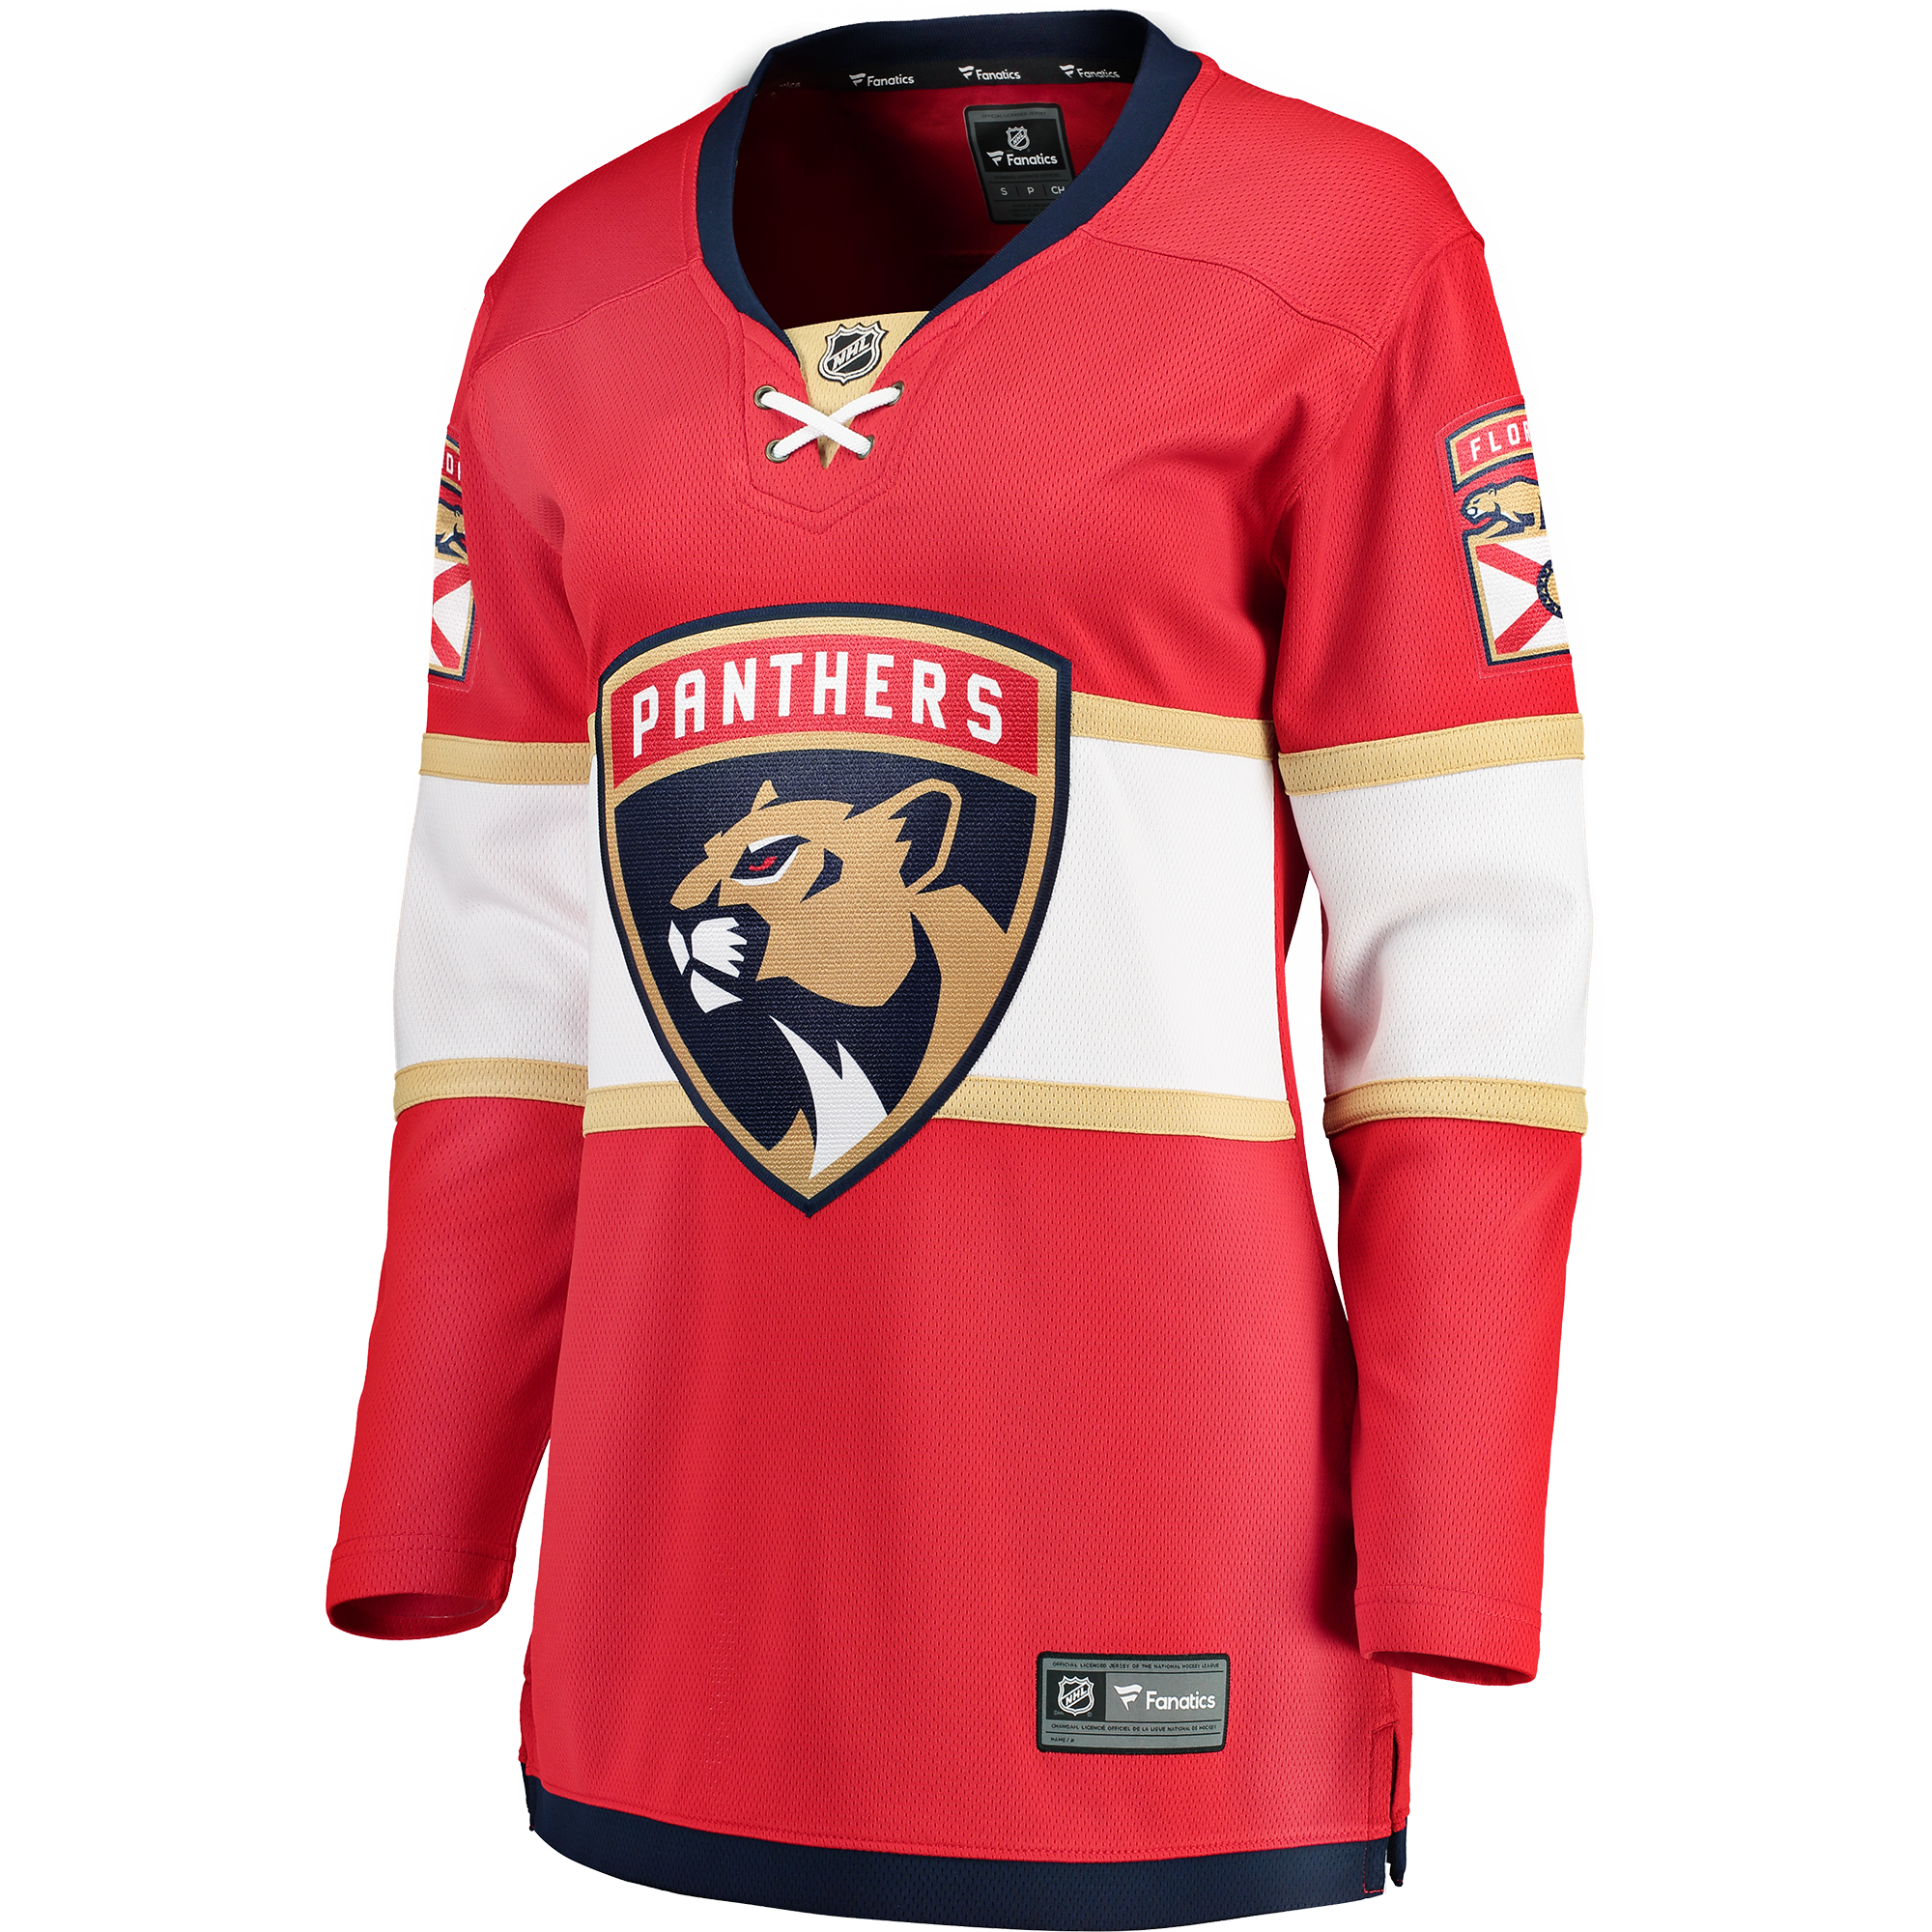 Florida Panthers Fanatics Branded Women's Home Breakaway Player Jersey - Red